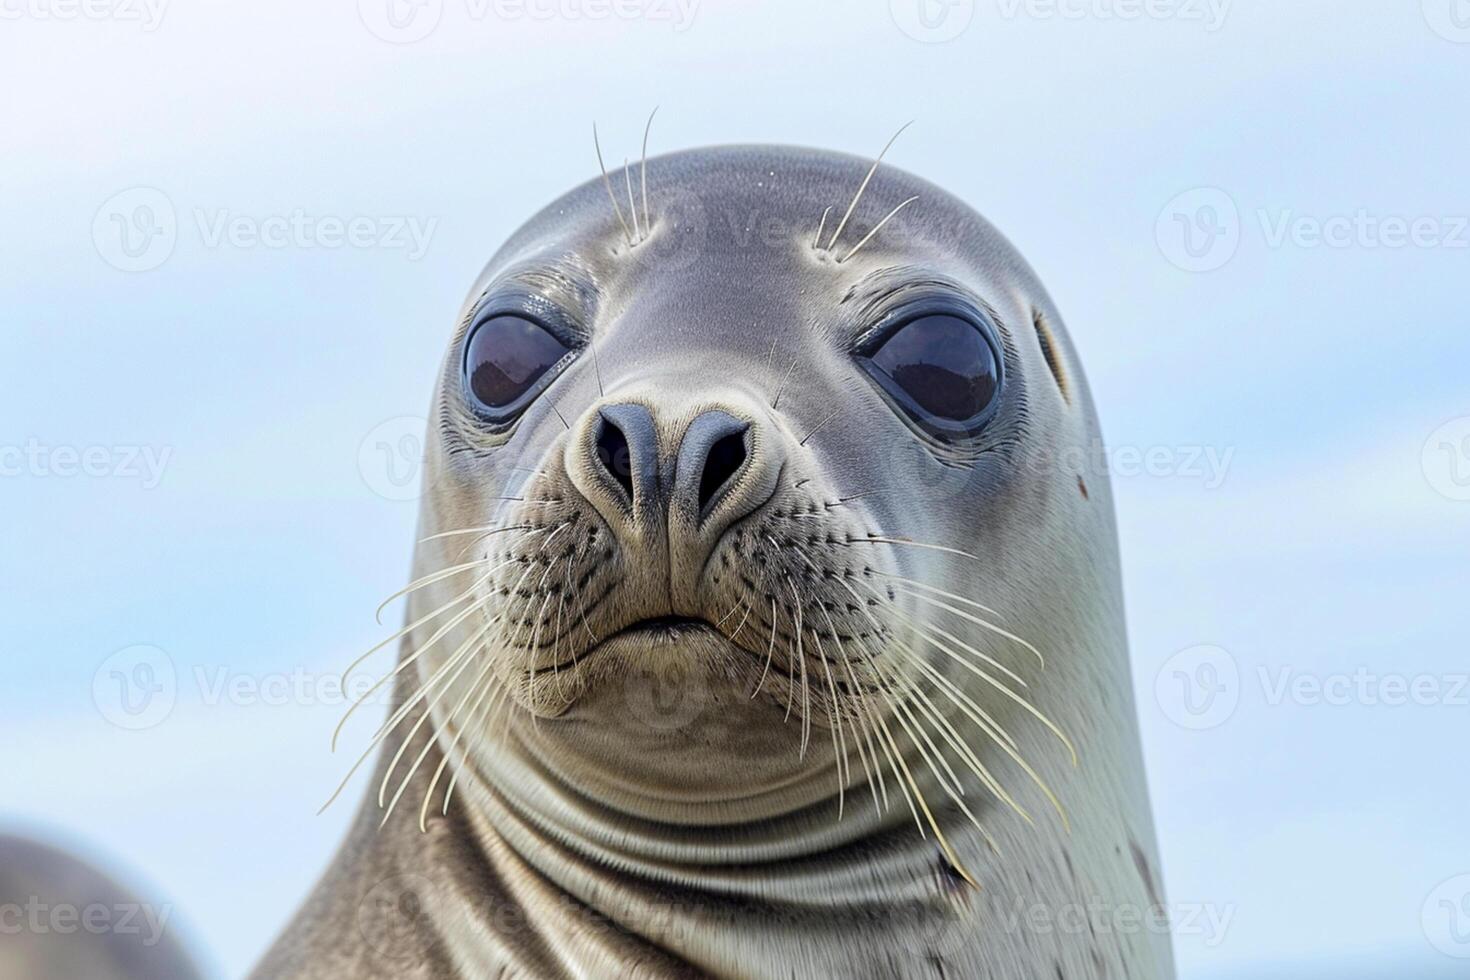 AI generated seal has smooth, grey skin with some visible textures and wrinkles Ai generated photo